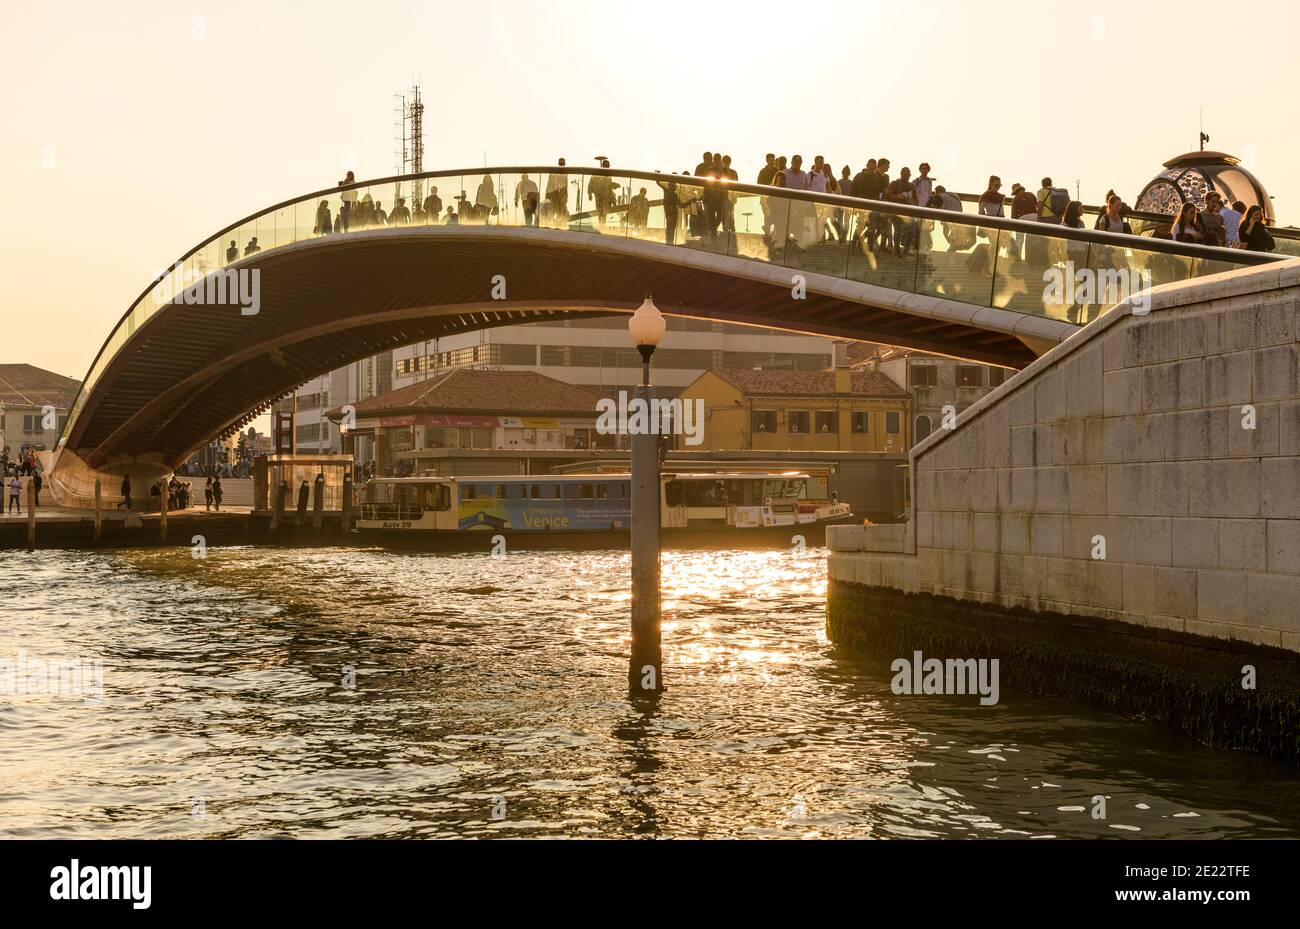 Modern Bridge - Evening view of the Constitution Bridge, connecting Santa Lucia Railroad Station and Piazzale Roma, over Grand Canal in Venice, Italy. Stock Photo